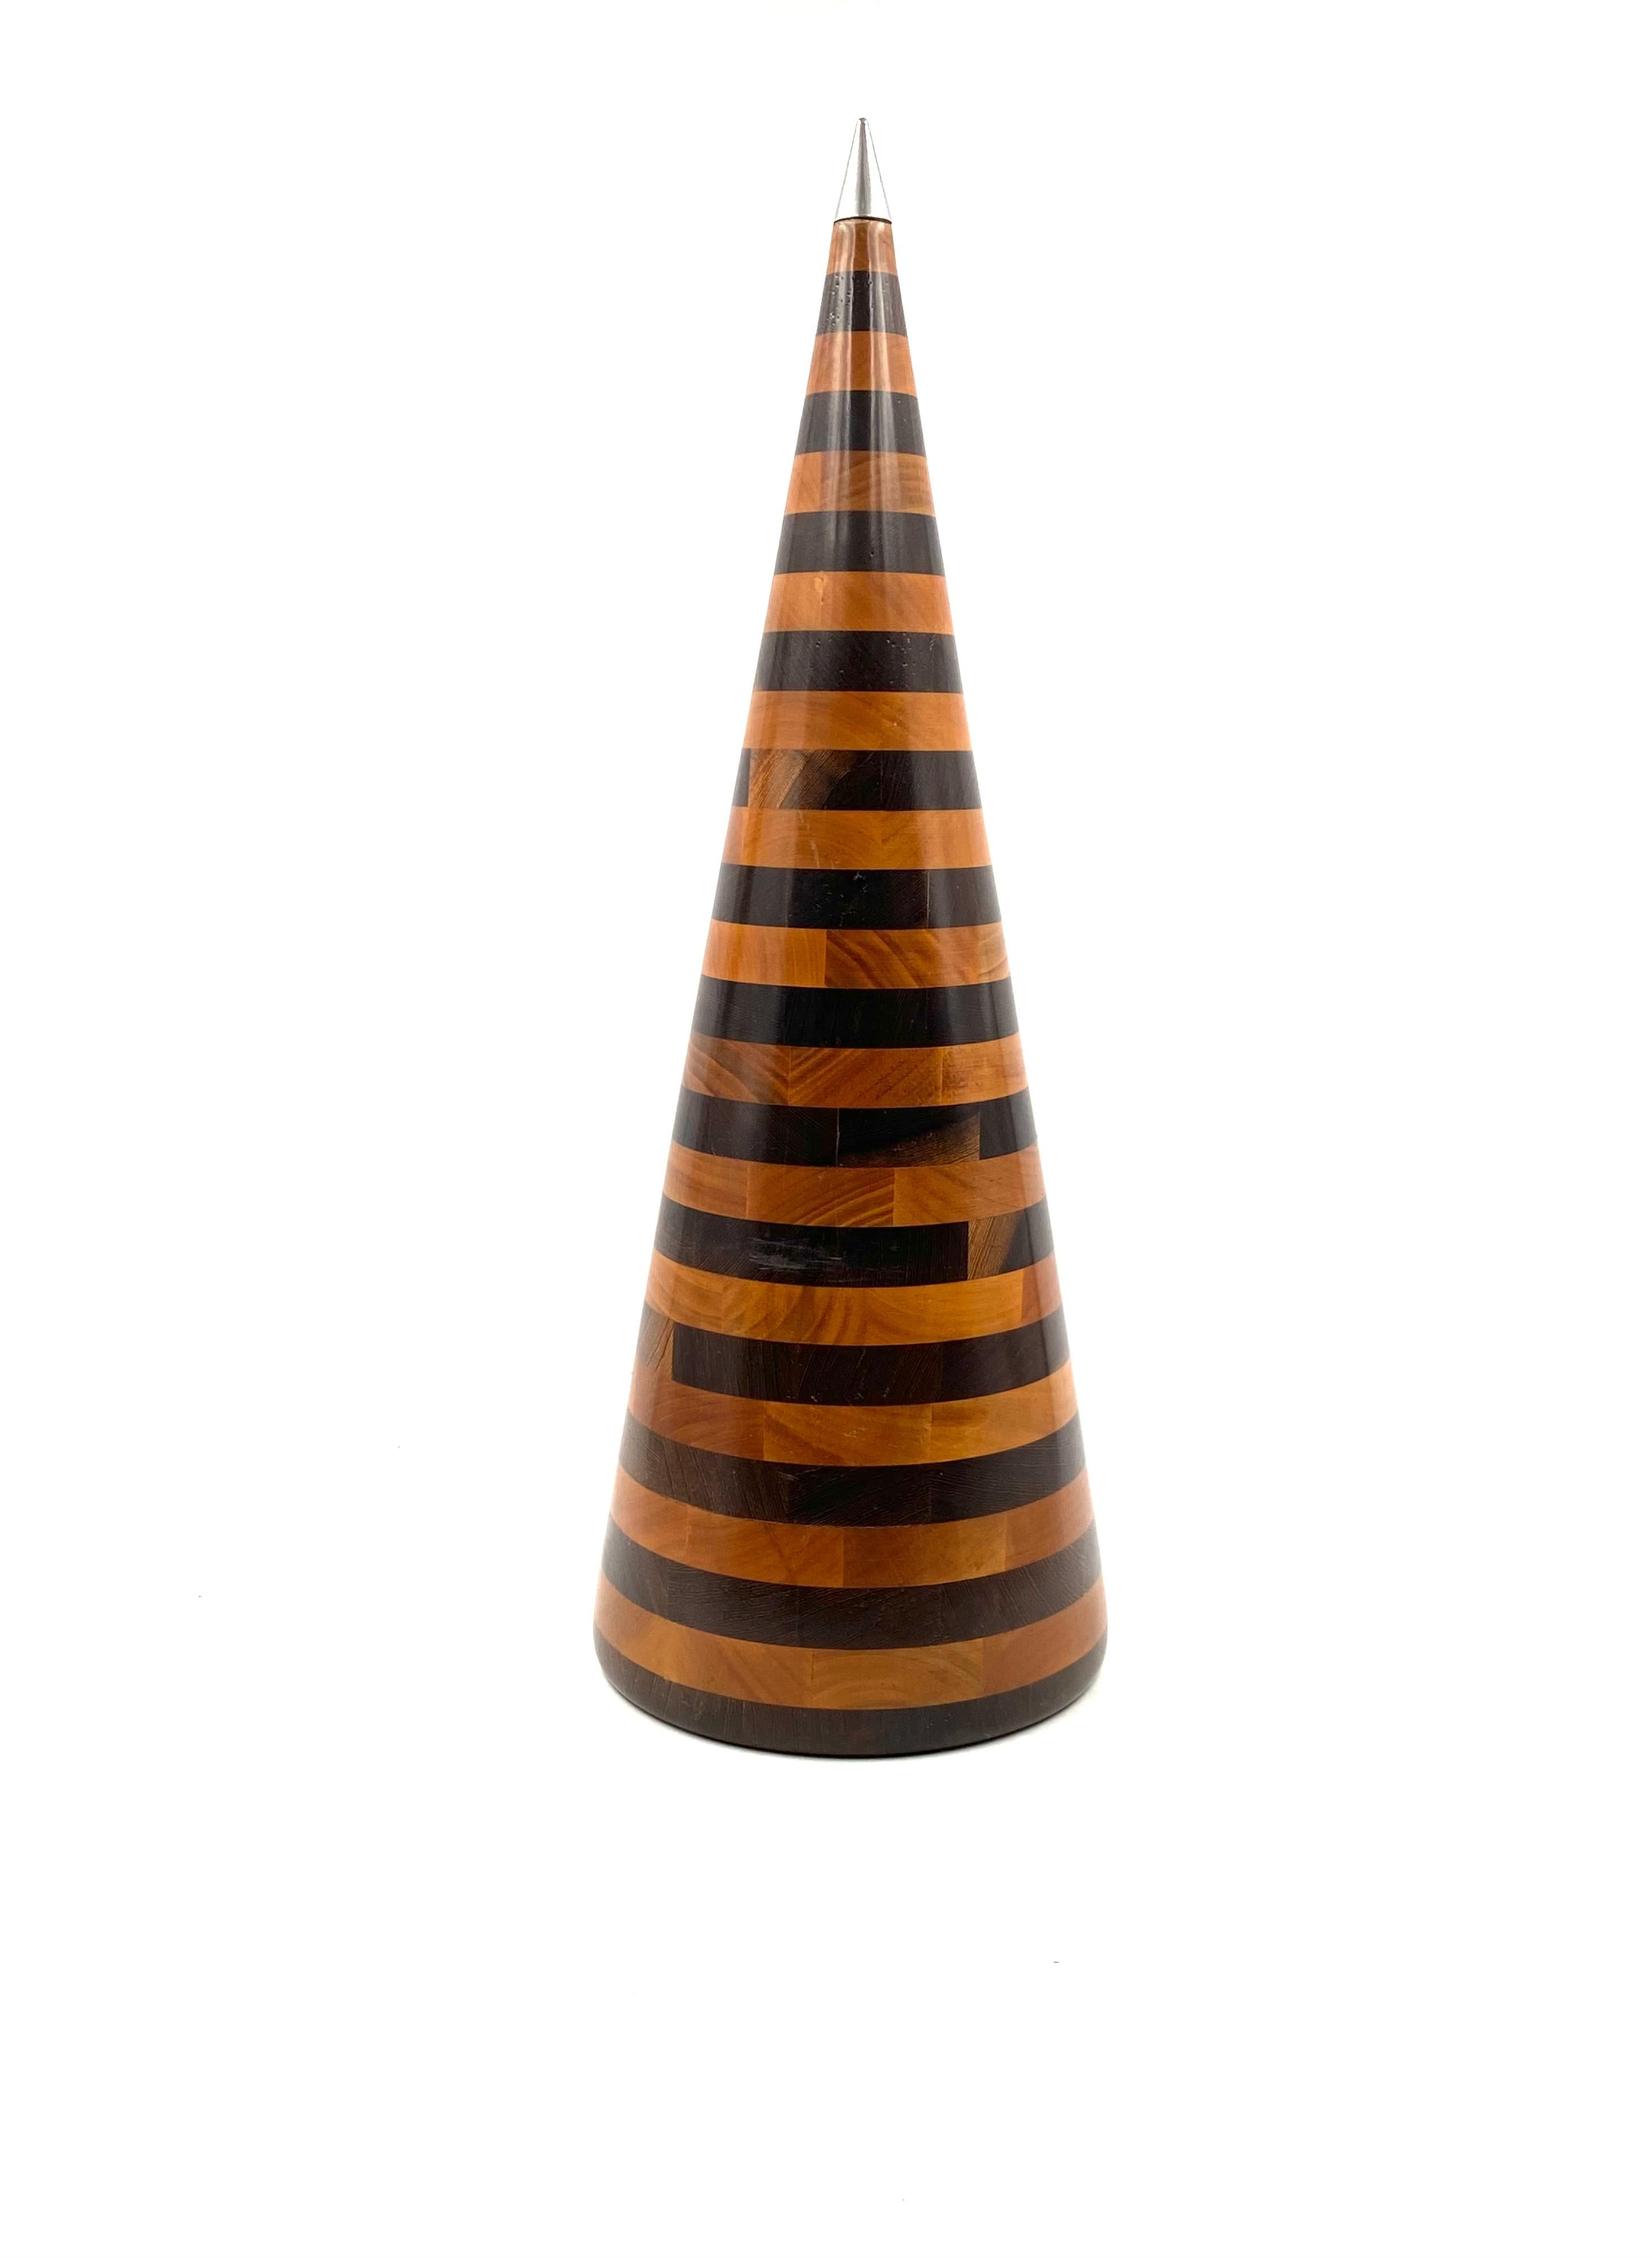 Italian Conic Solid Wood Sculpture, Salmistraro, Italy, 1970s For Sale